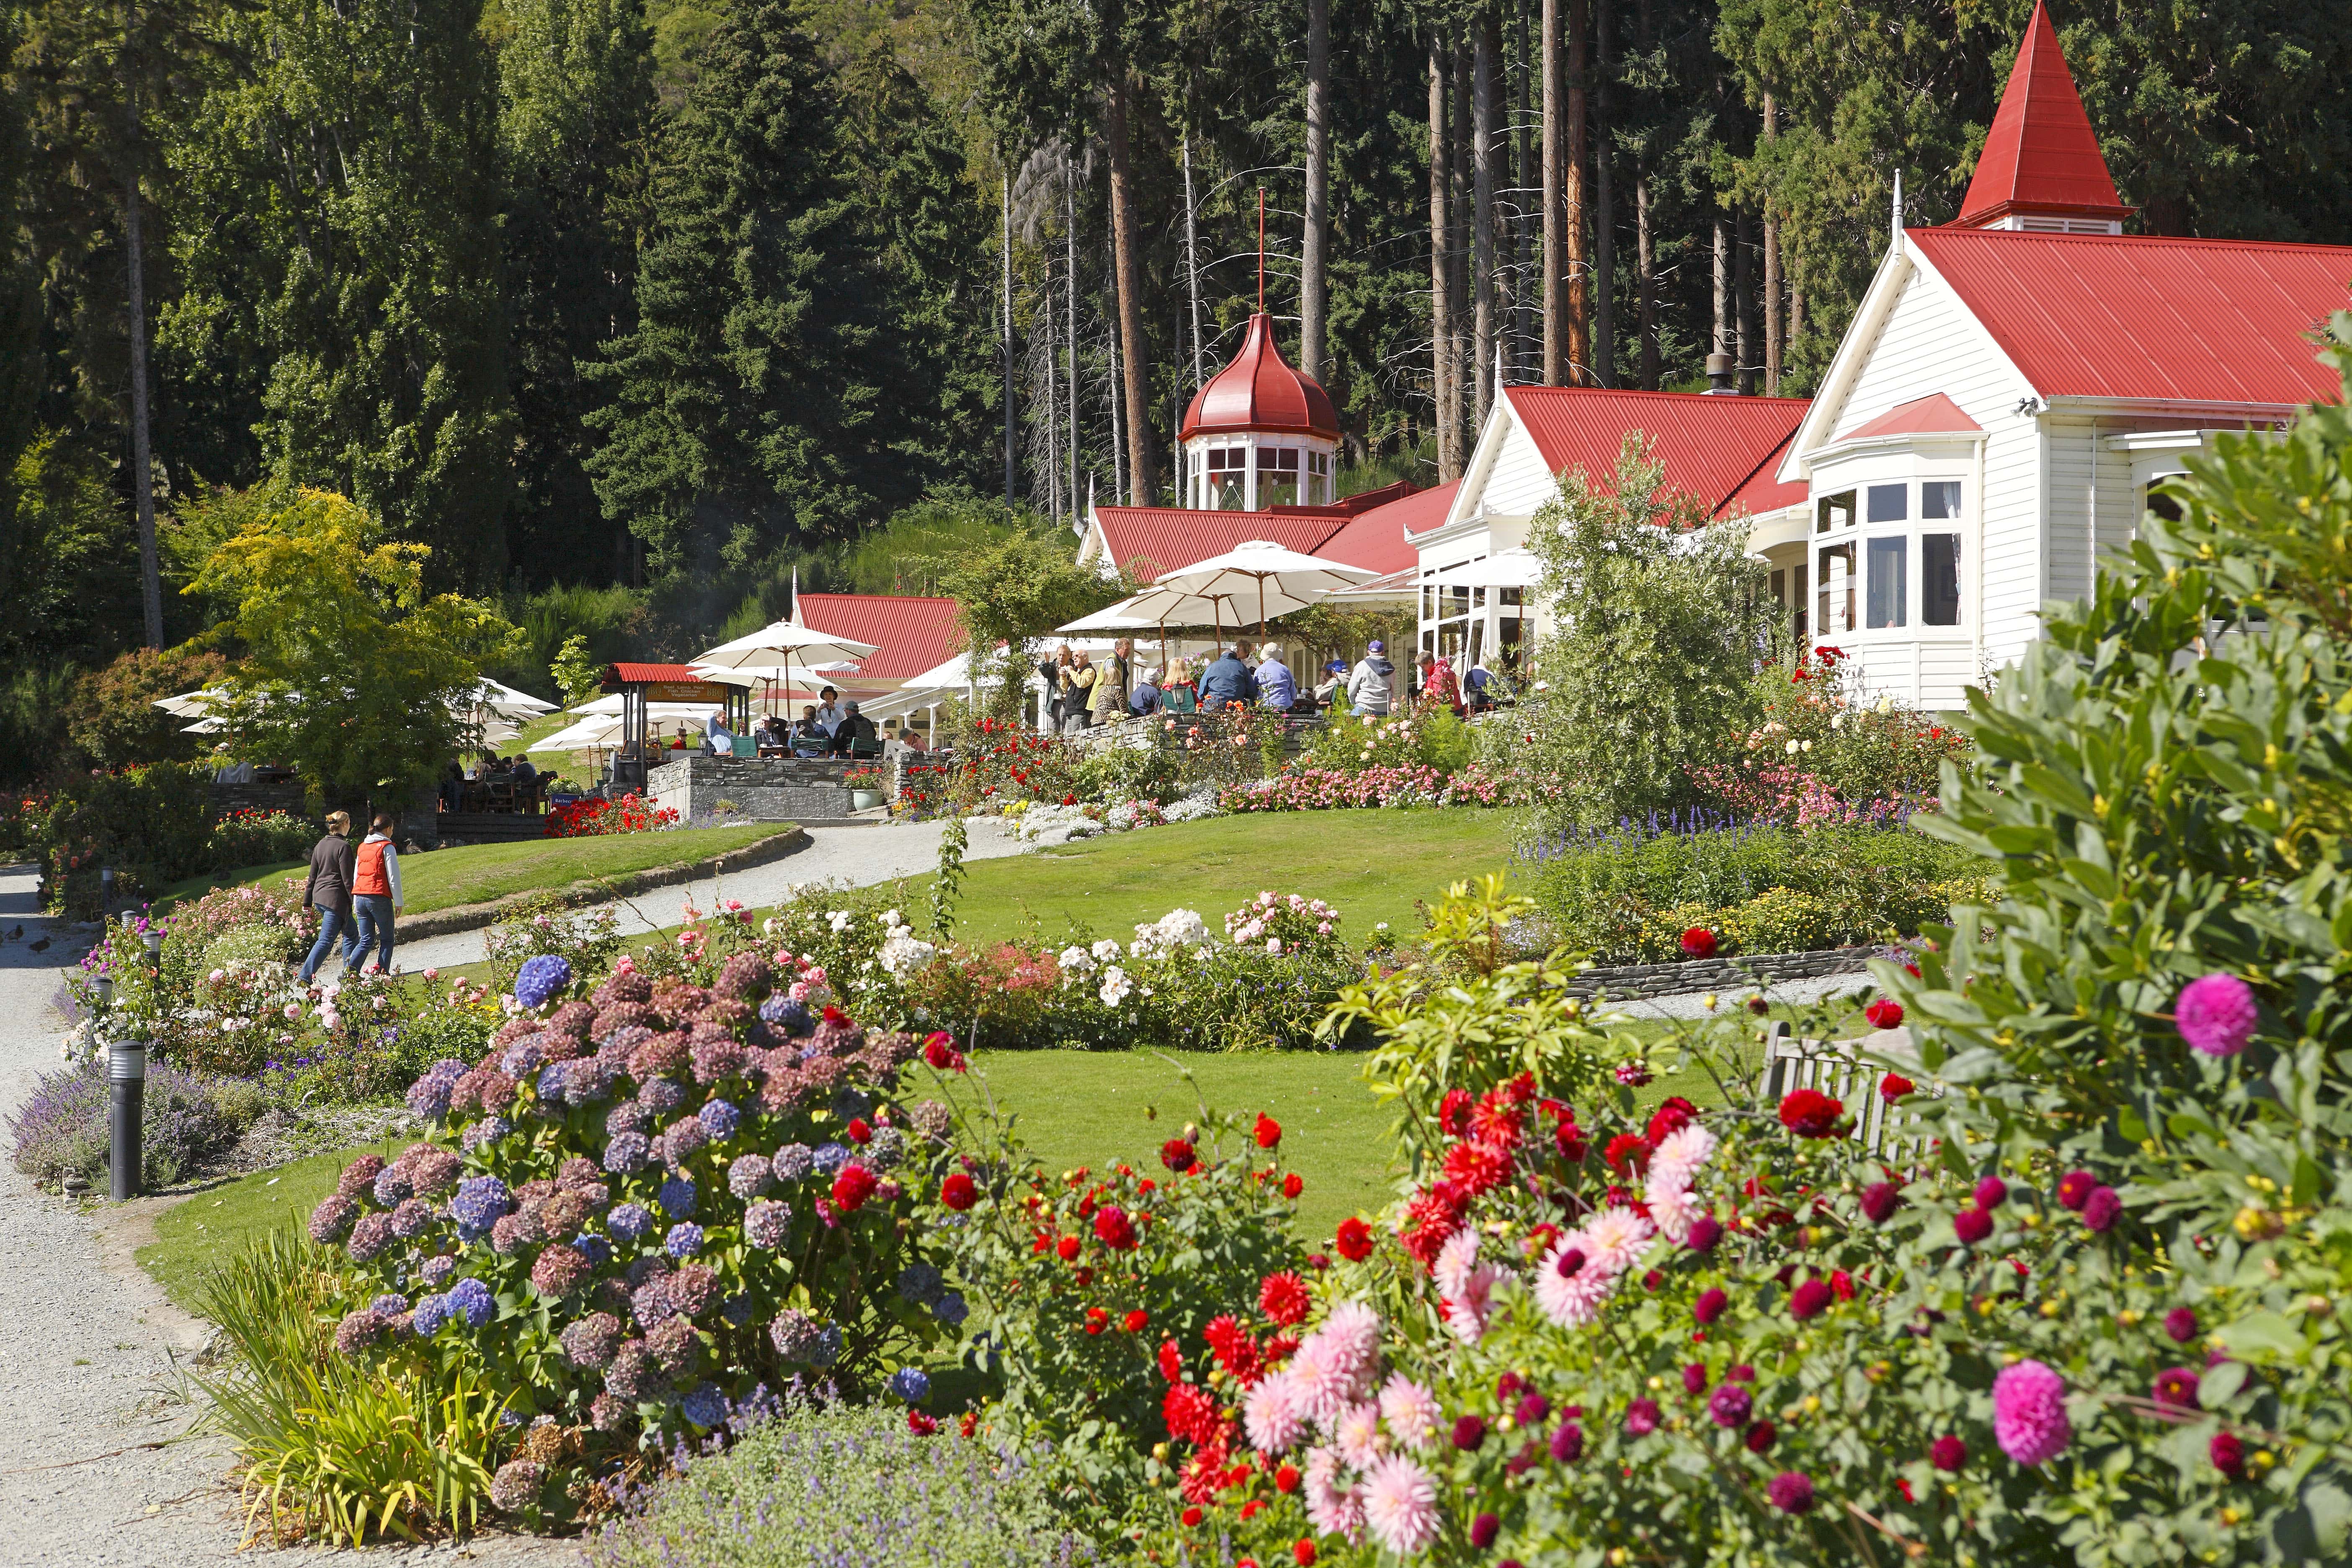 Colonel's Homestead and gardens at Walter Peak High Country Farm